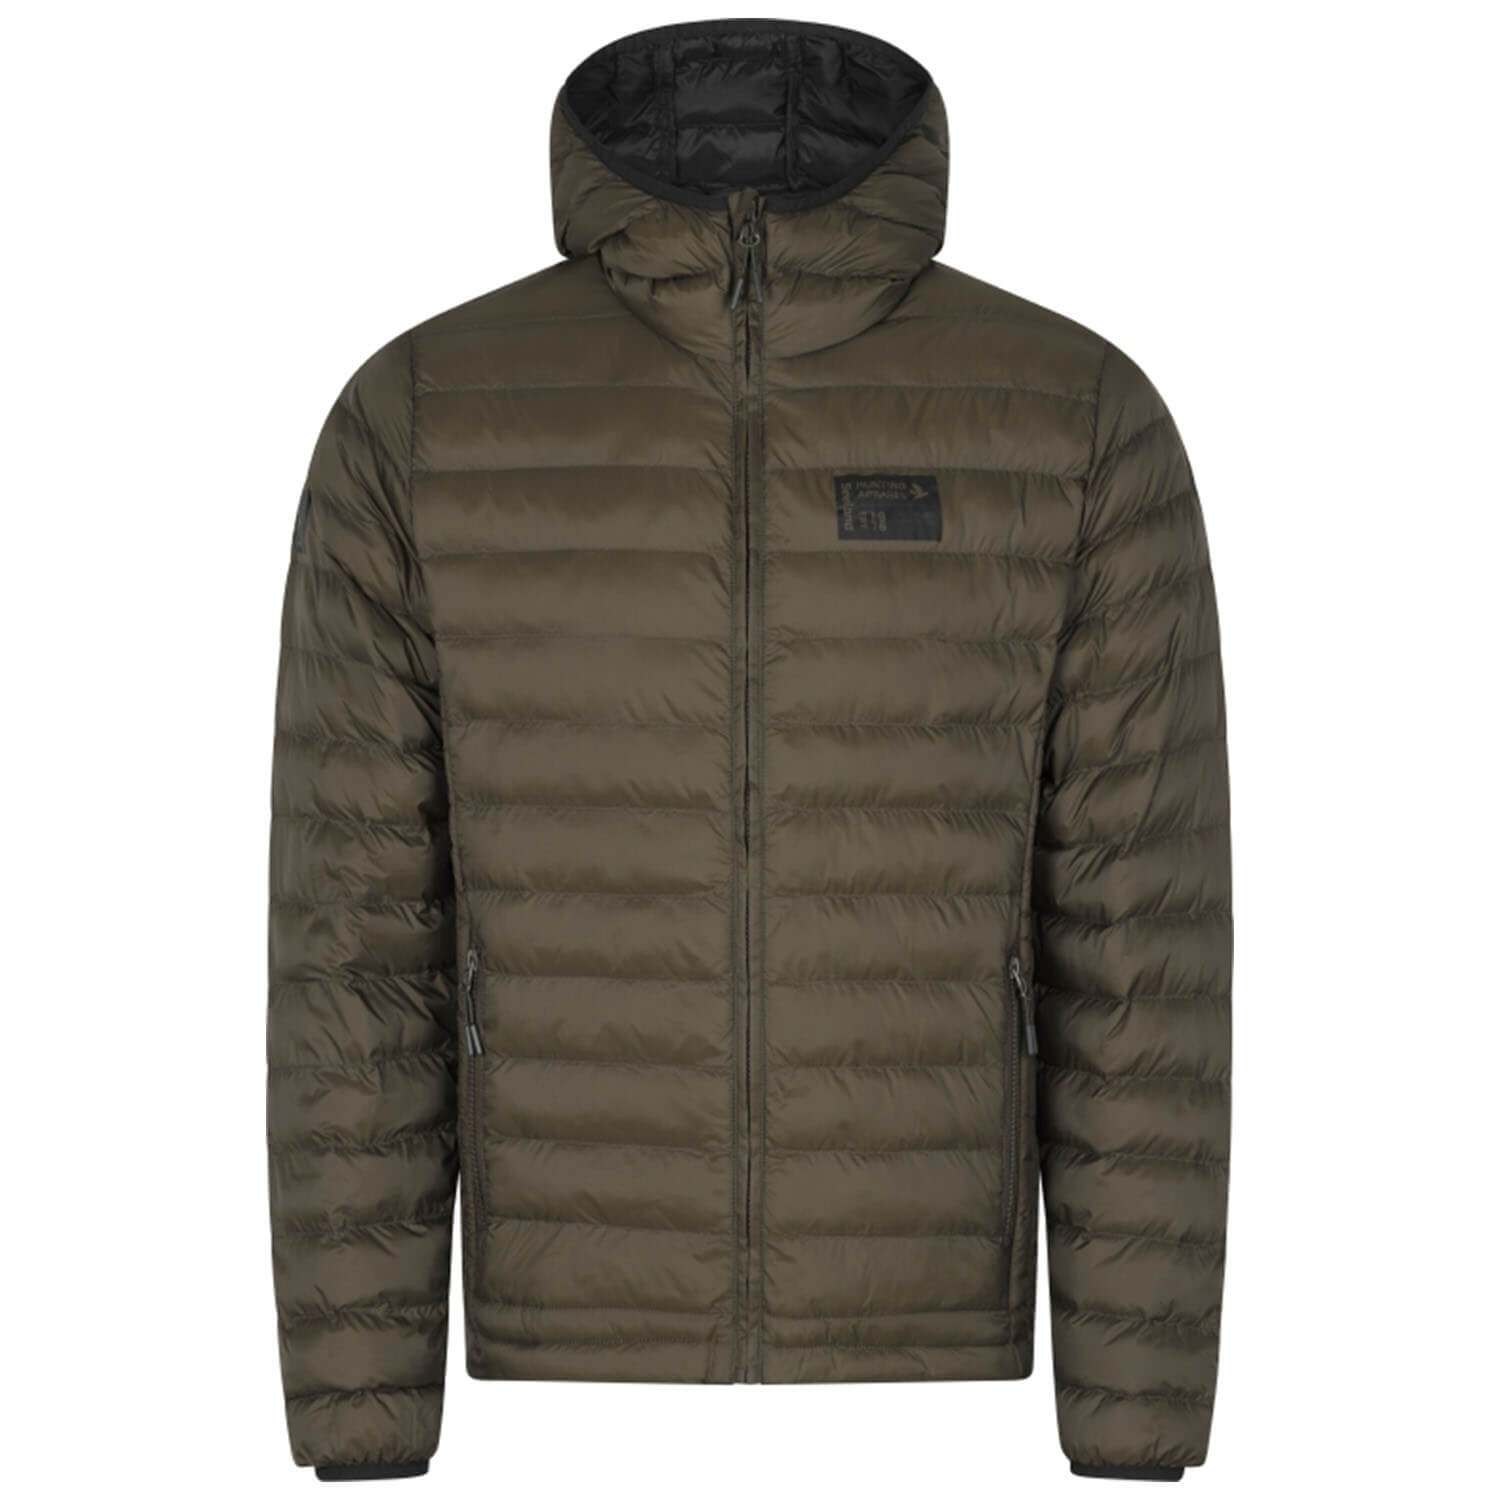 Seeland quilted jacket fahrenheit (Light Pine) - Winter Hunting Clothing